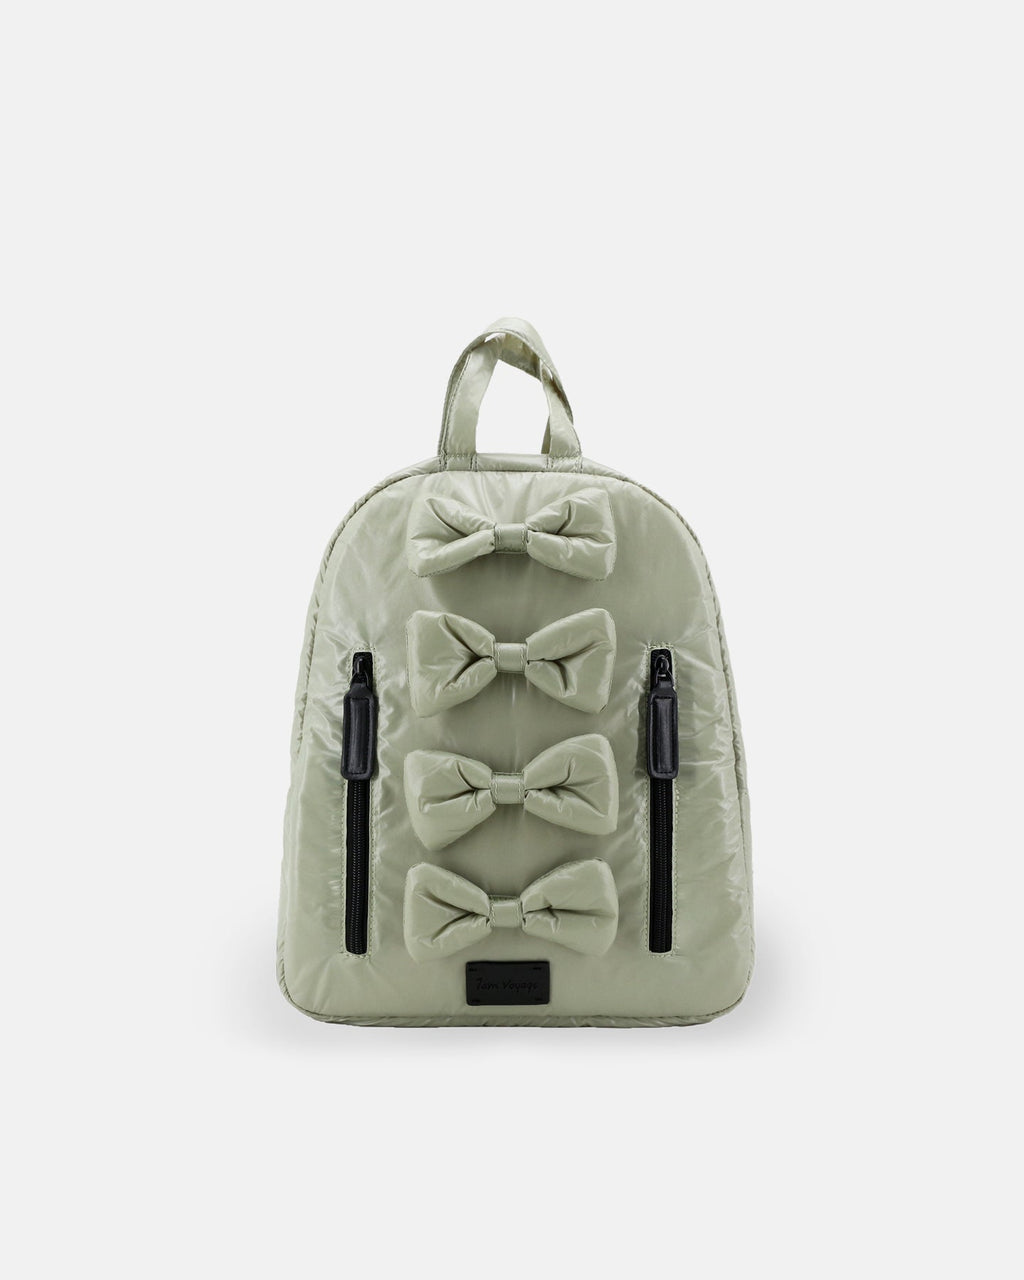 7am Midi Bow Backpack - Multiple Colors!